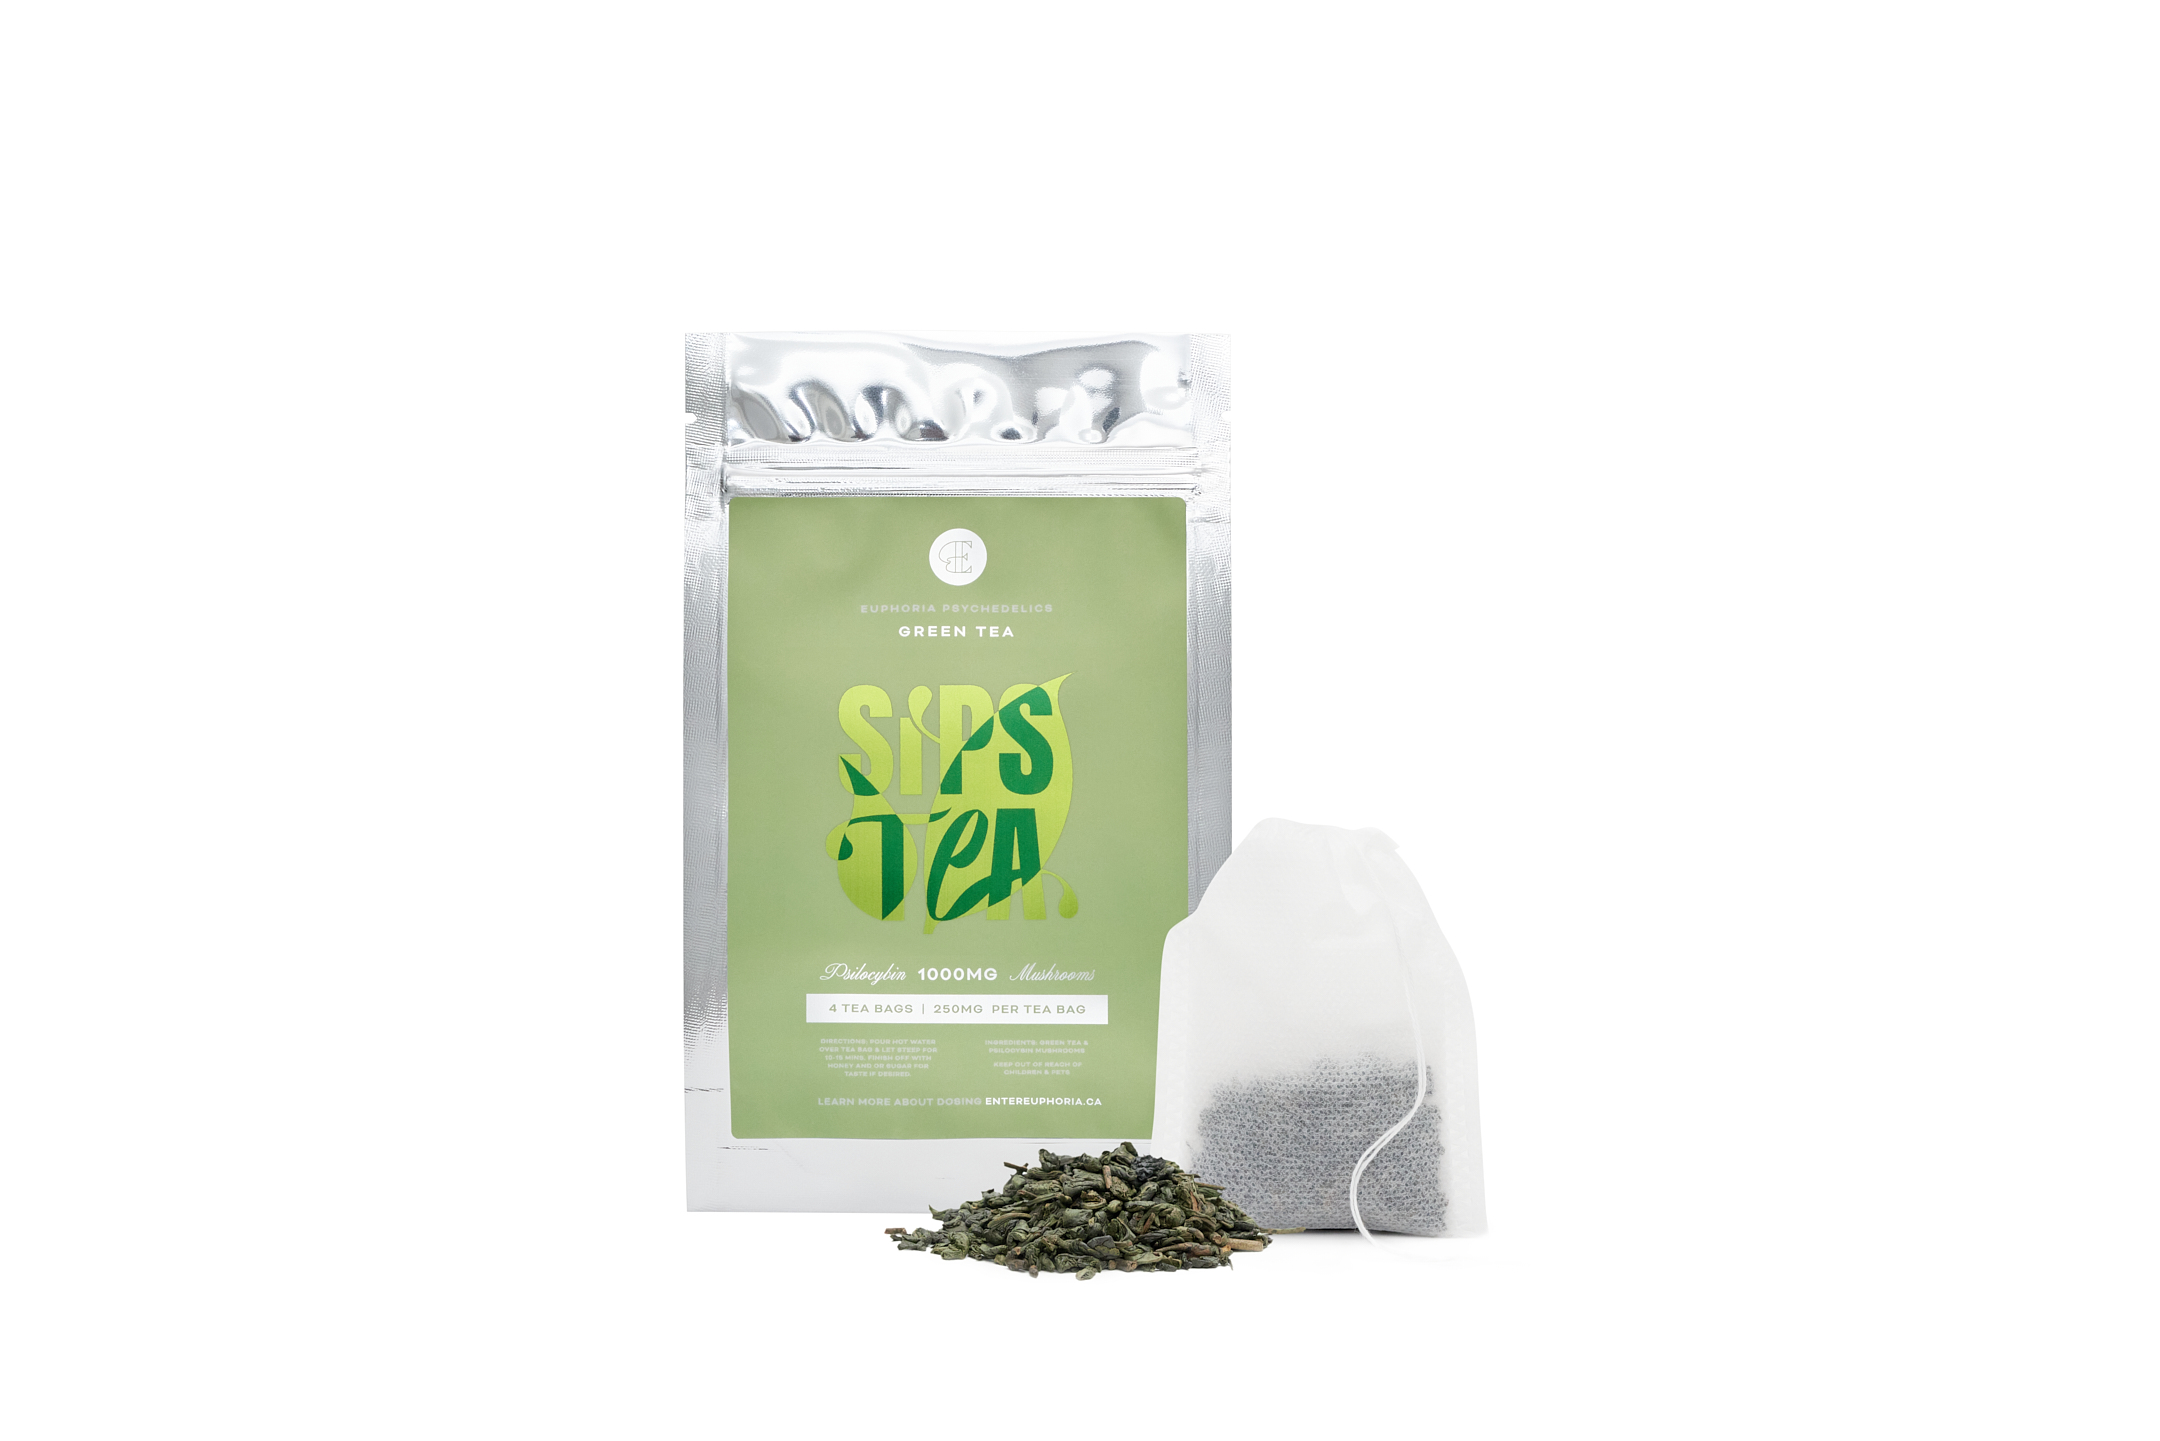 The Republic of Tea – Cocoa Shroom Latte Capsule-Compatible Recyclable Pods, 10 Count, Low Caffeine